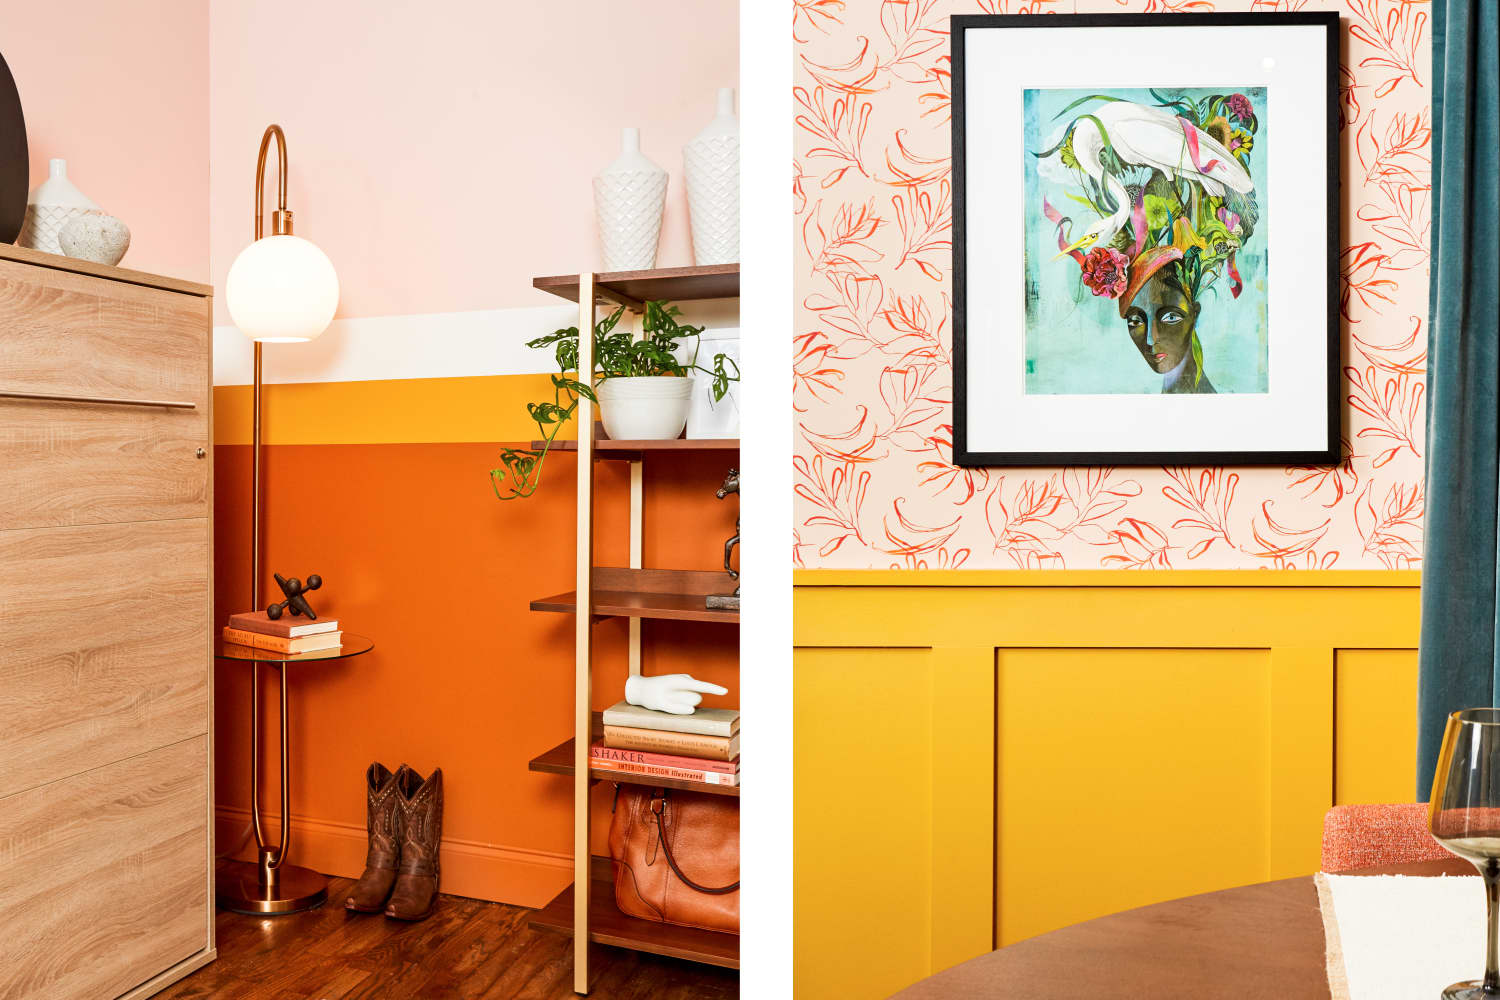 See How 5 Designers Made the Same Paint Colors Look Totally Different Ideas Design and Photo